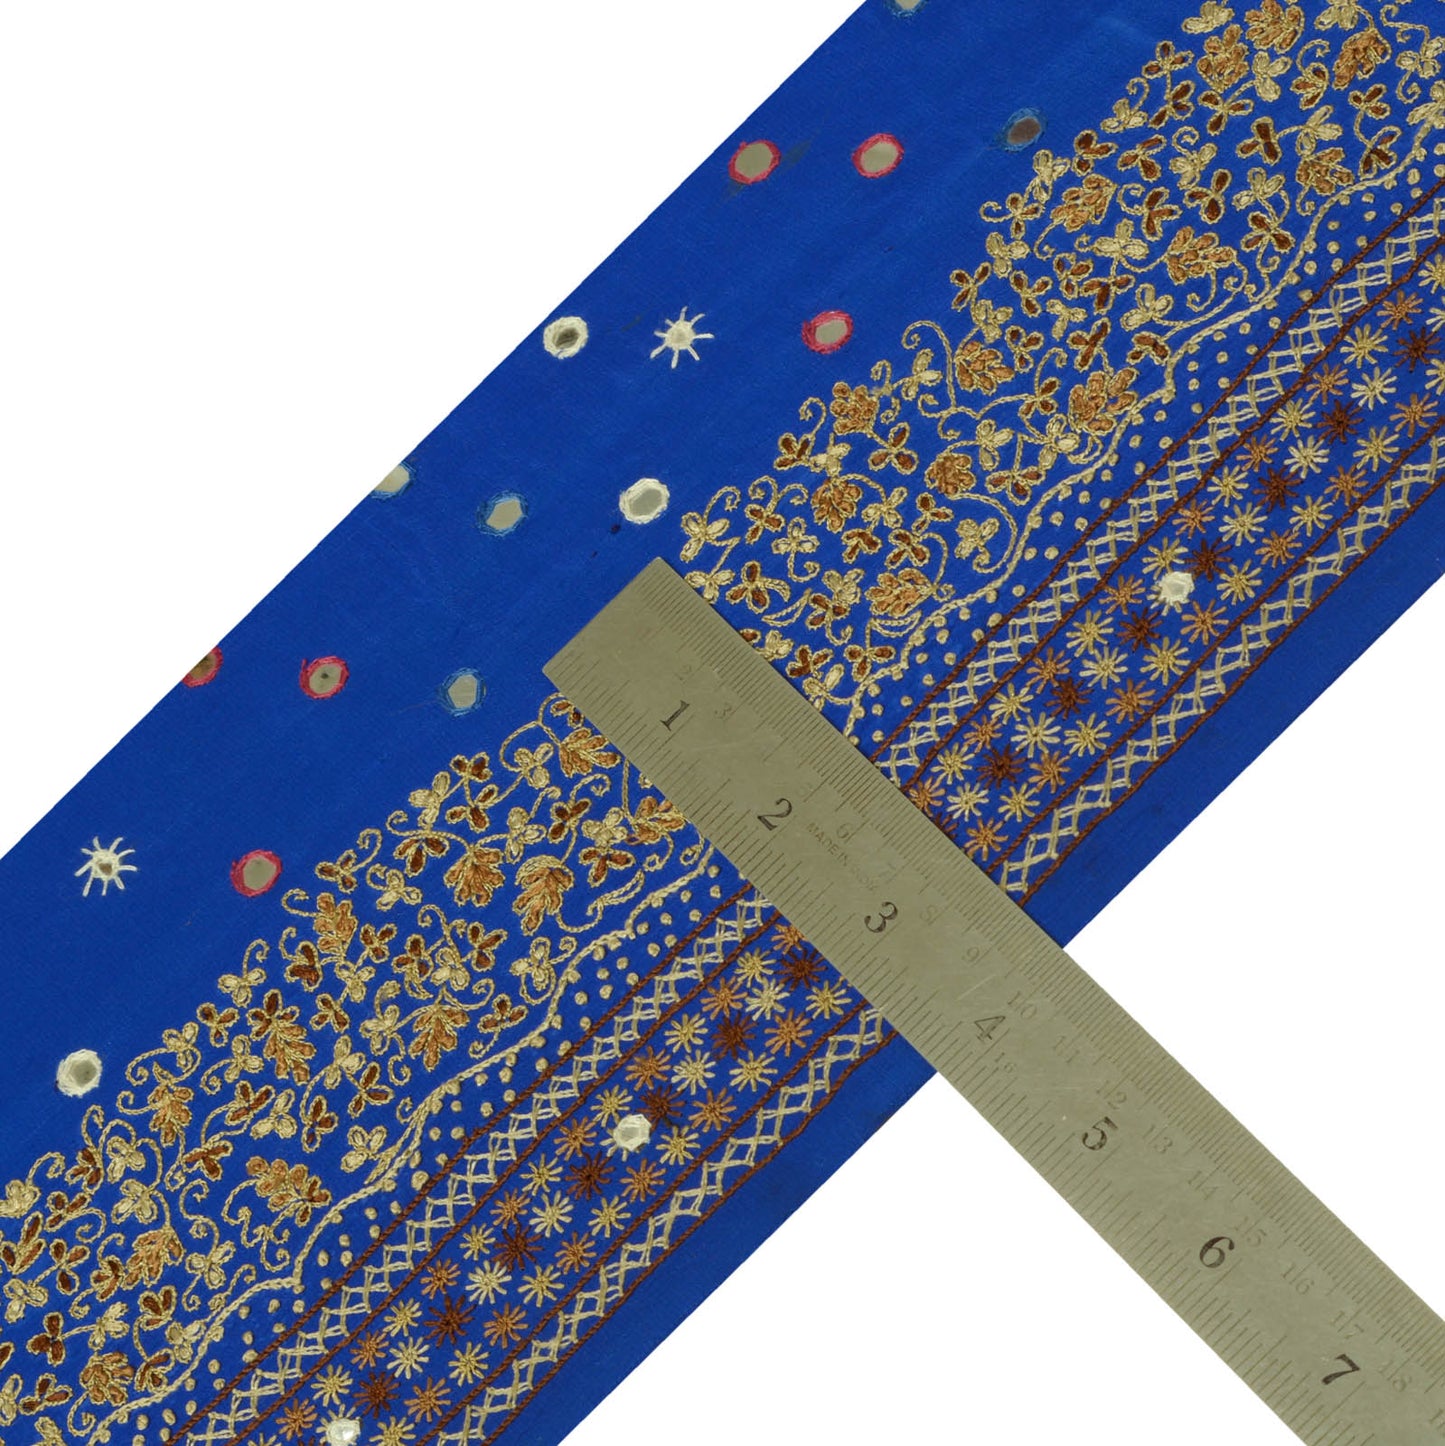 Sushila Vintage Blue Sari Border Indian Craft Sewing Trim Hand Embroidered Lace